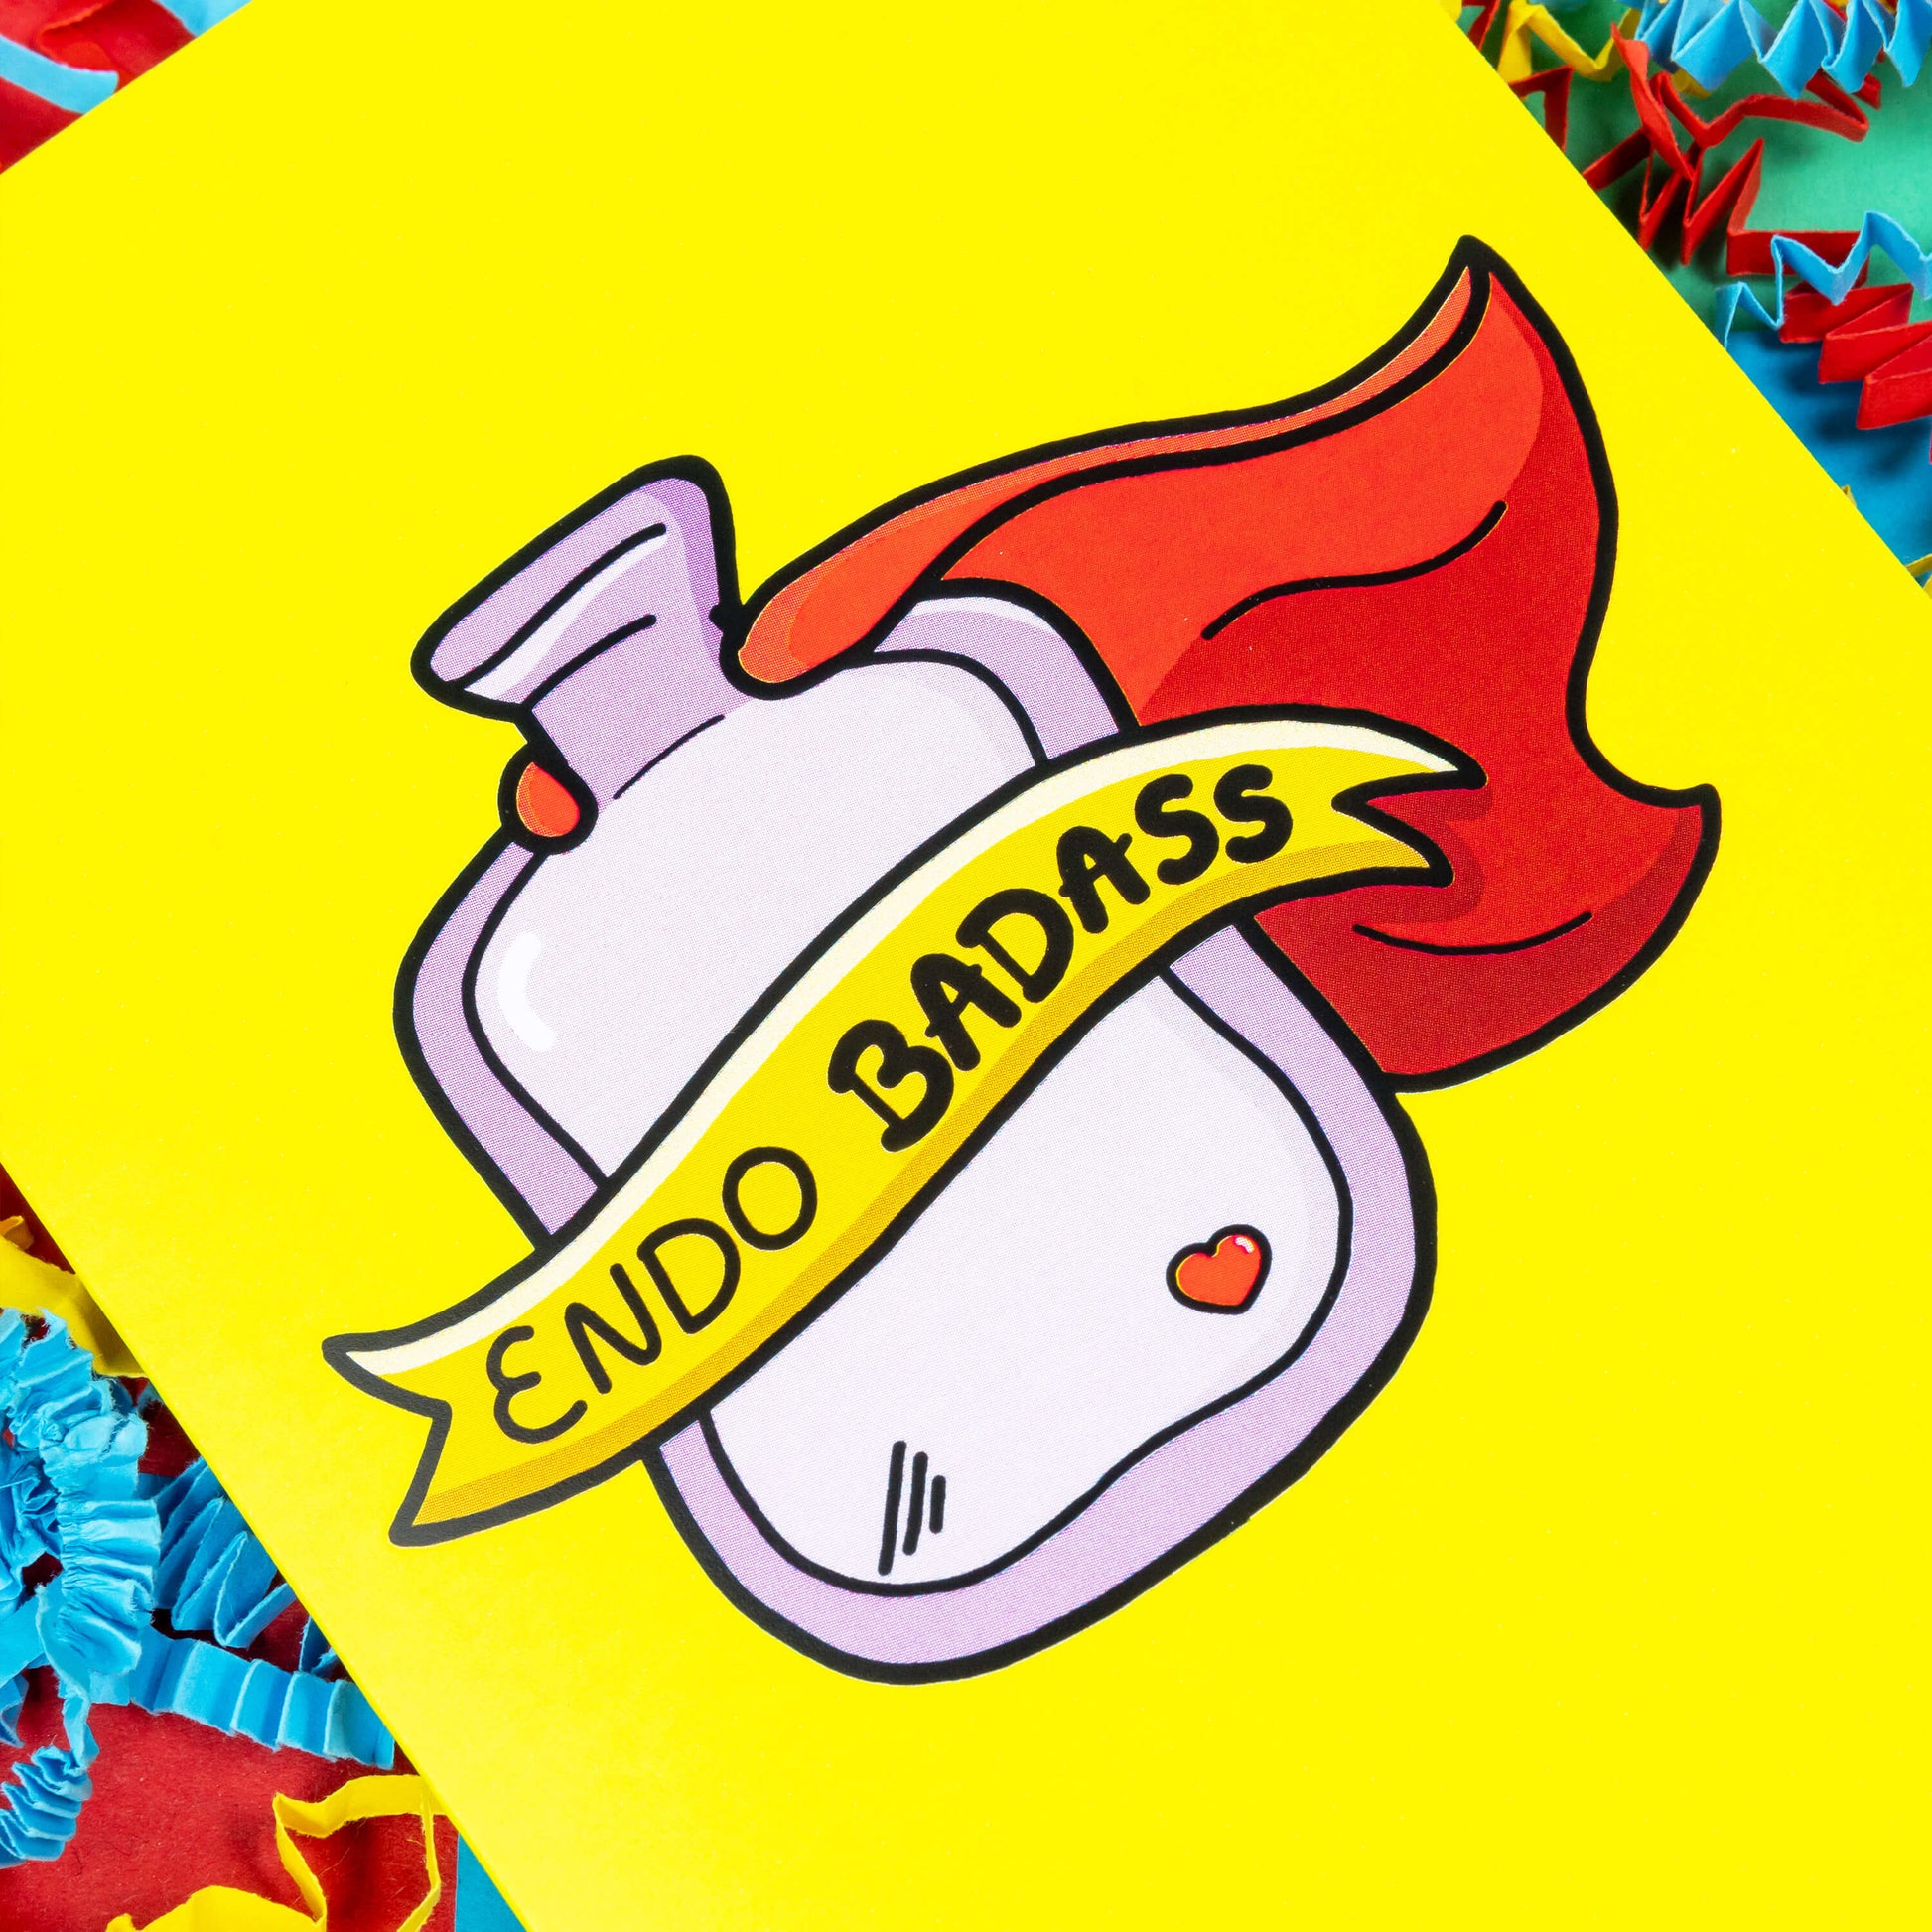 The Endo Badass Card - Endometriosis on a red, blue and green background with yellow, blue and red crinkle card confetti. The yellow based card features a pink hot waterbottle with a small red heart, a red cape and a yellow banner across reading 'endo badass'. Hand drawn design is raising awareness for Endometriosis and pelvic pain.